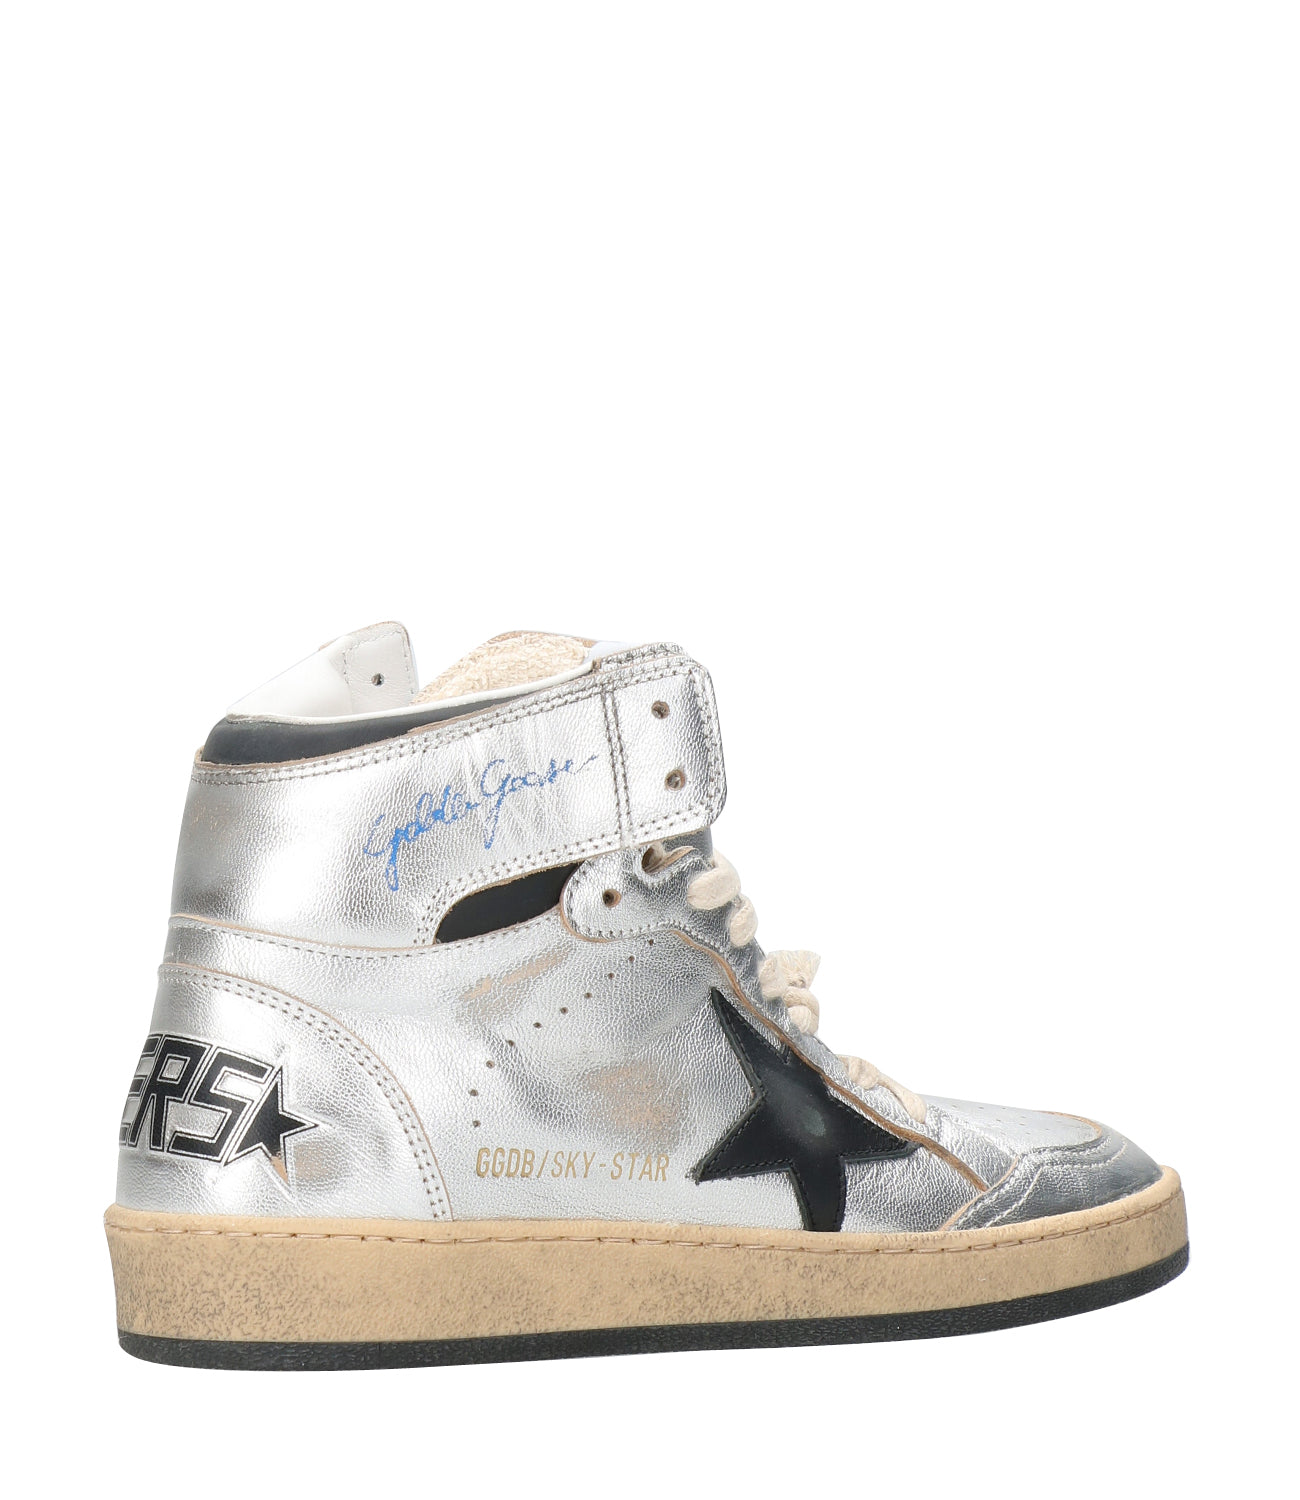 Golden Goose | Sneakers Sky-Star Silver and Black